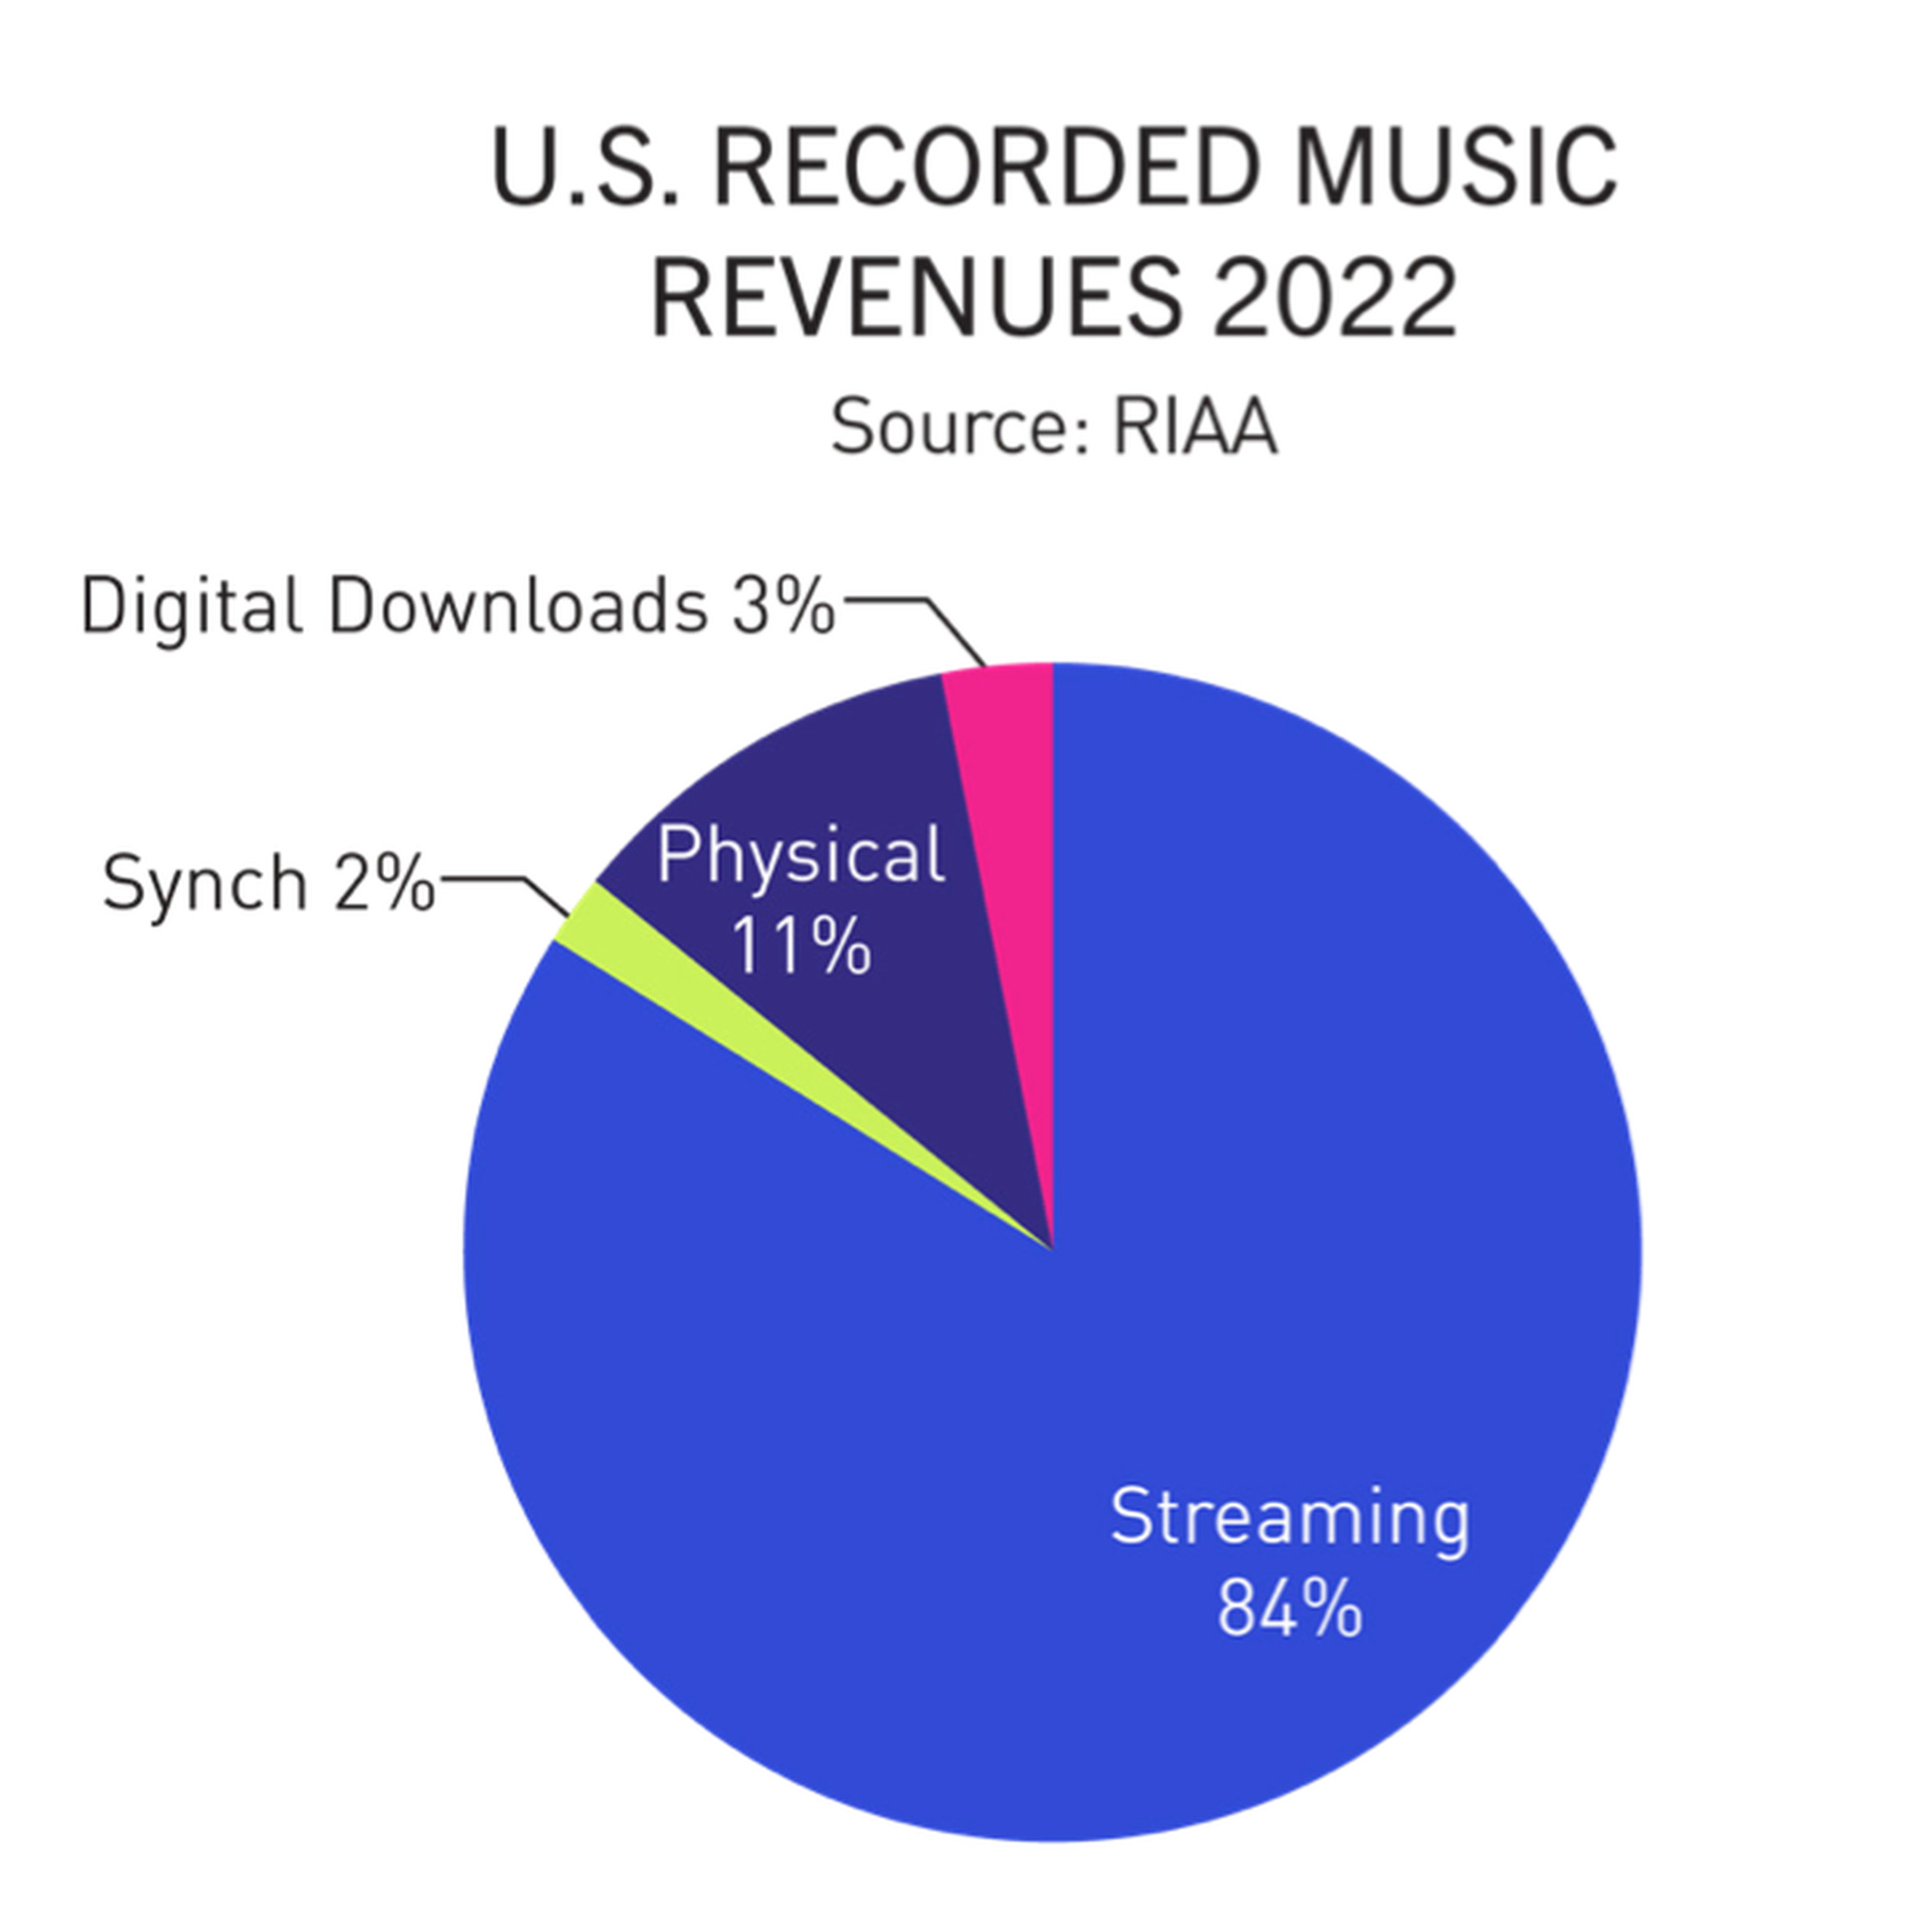 A pie chart displaying the revenue split between different recorded music platforms in the US for 2022. Streaming accounts for 84 percent, physical for 11 percent, digital downloads for 3 percent and synch for 2 percent.